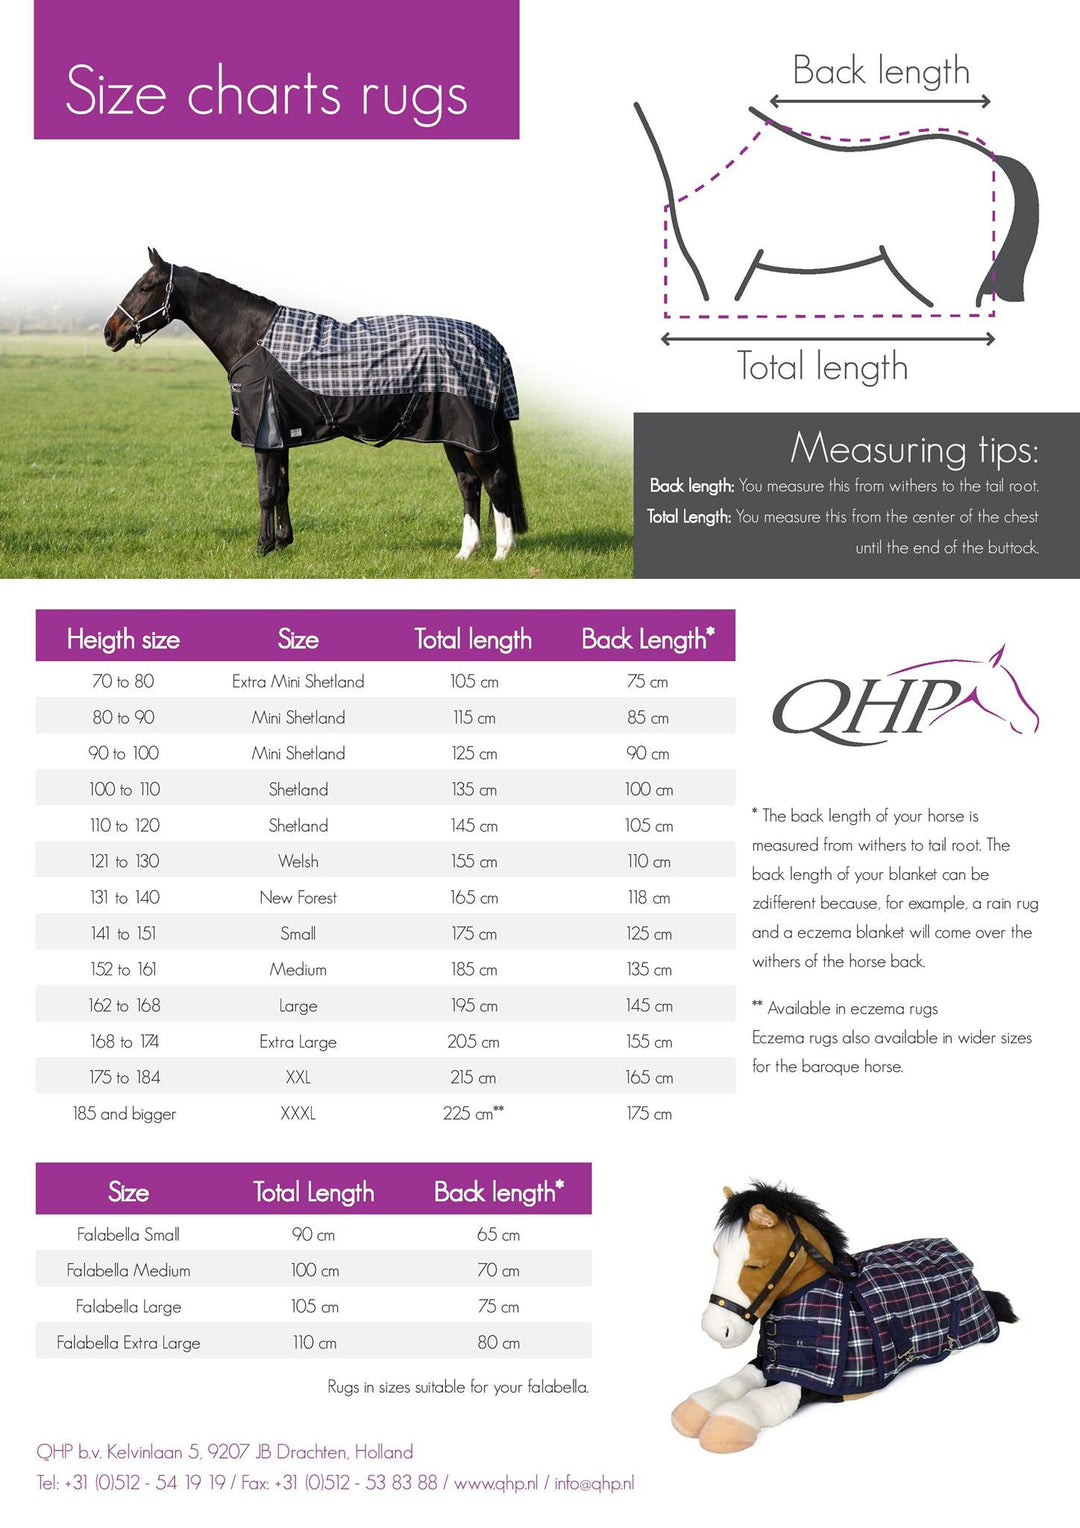 QHP Stable Rug Navy Check150gsm  - Eqclusive  - 4